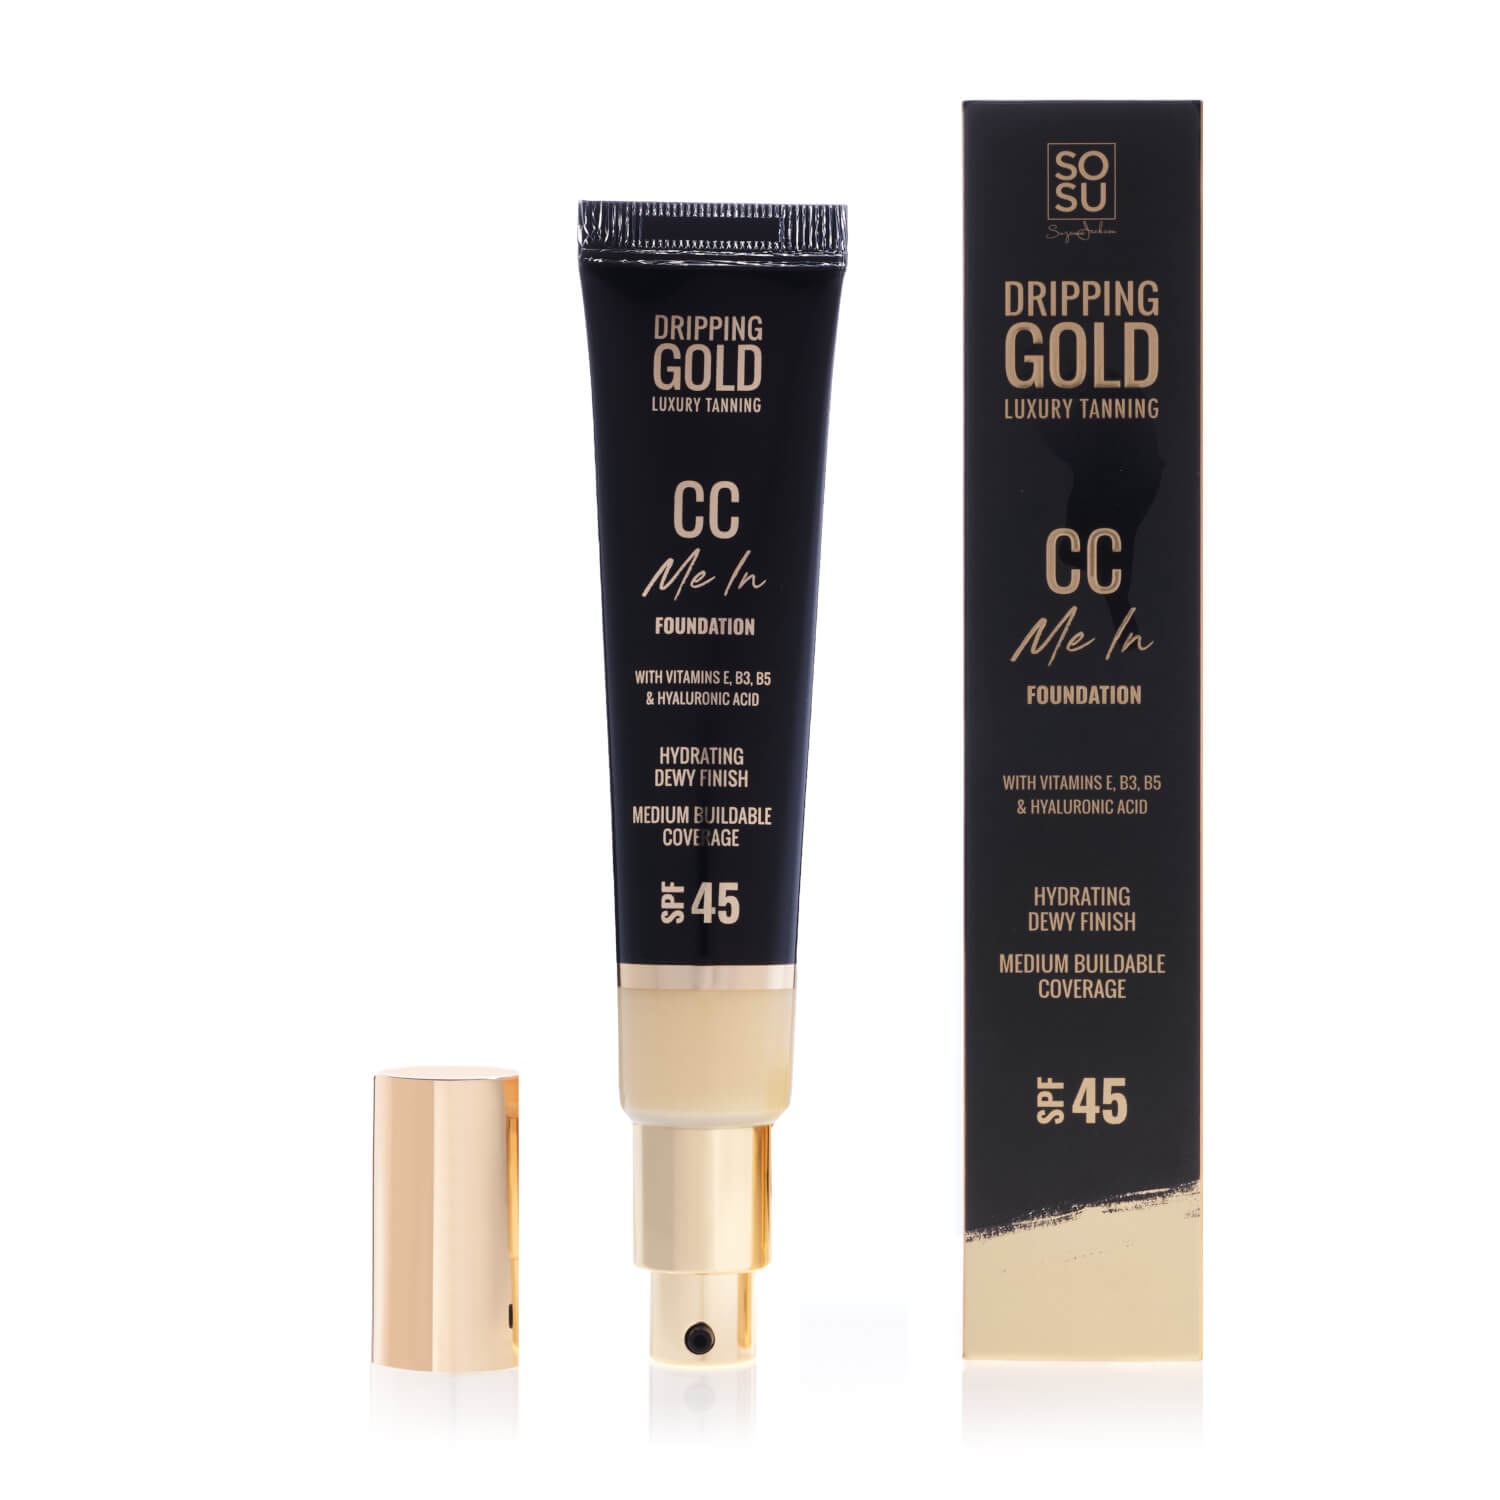 Sosu Dripping Gold CC Me In Foundation Cream - 35ml 1 Shaws Department Stores